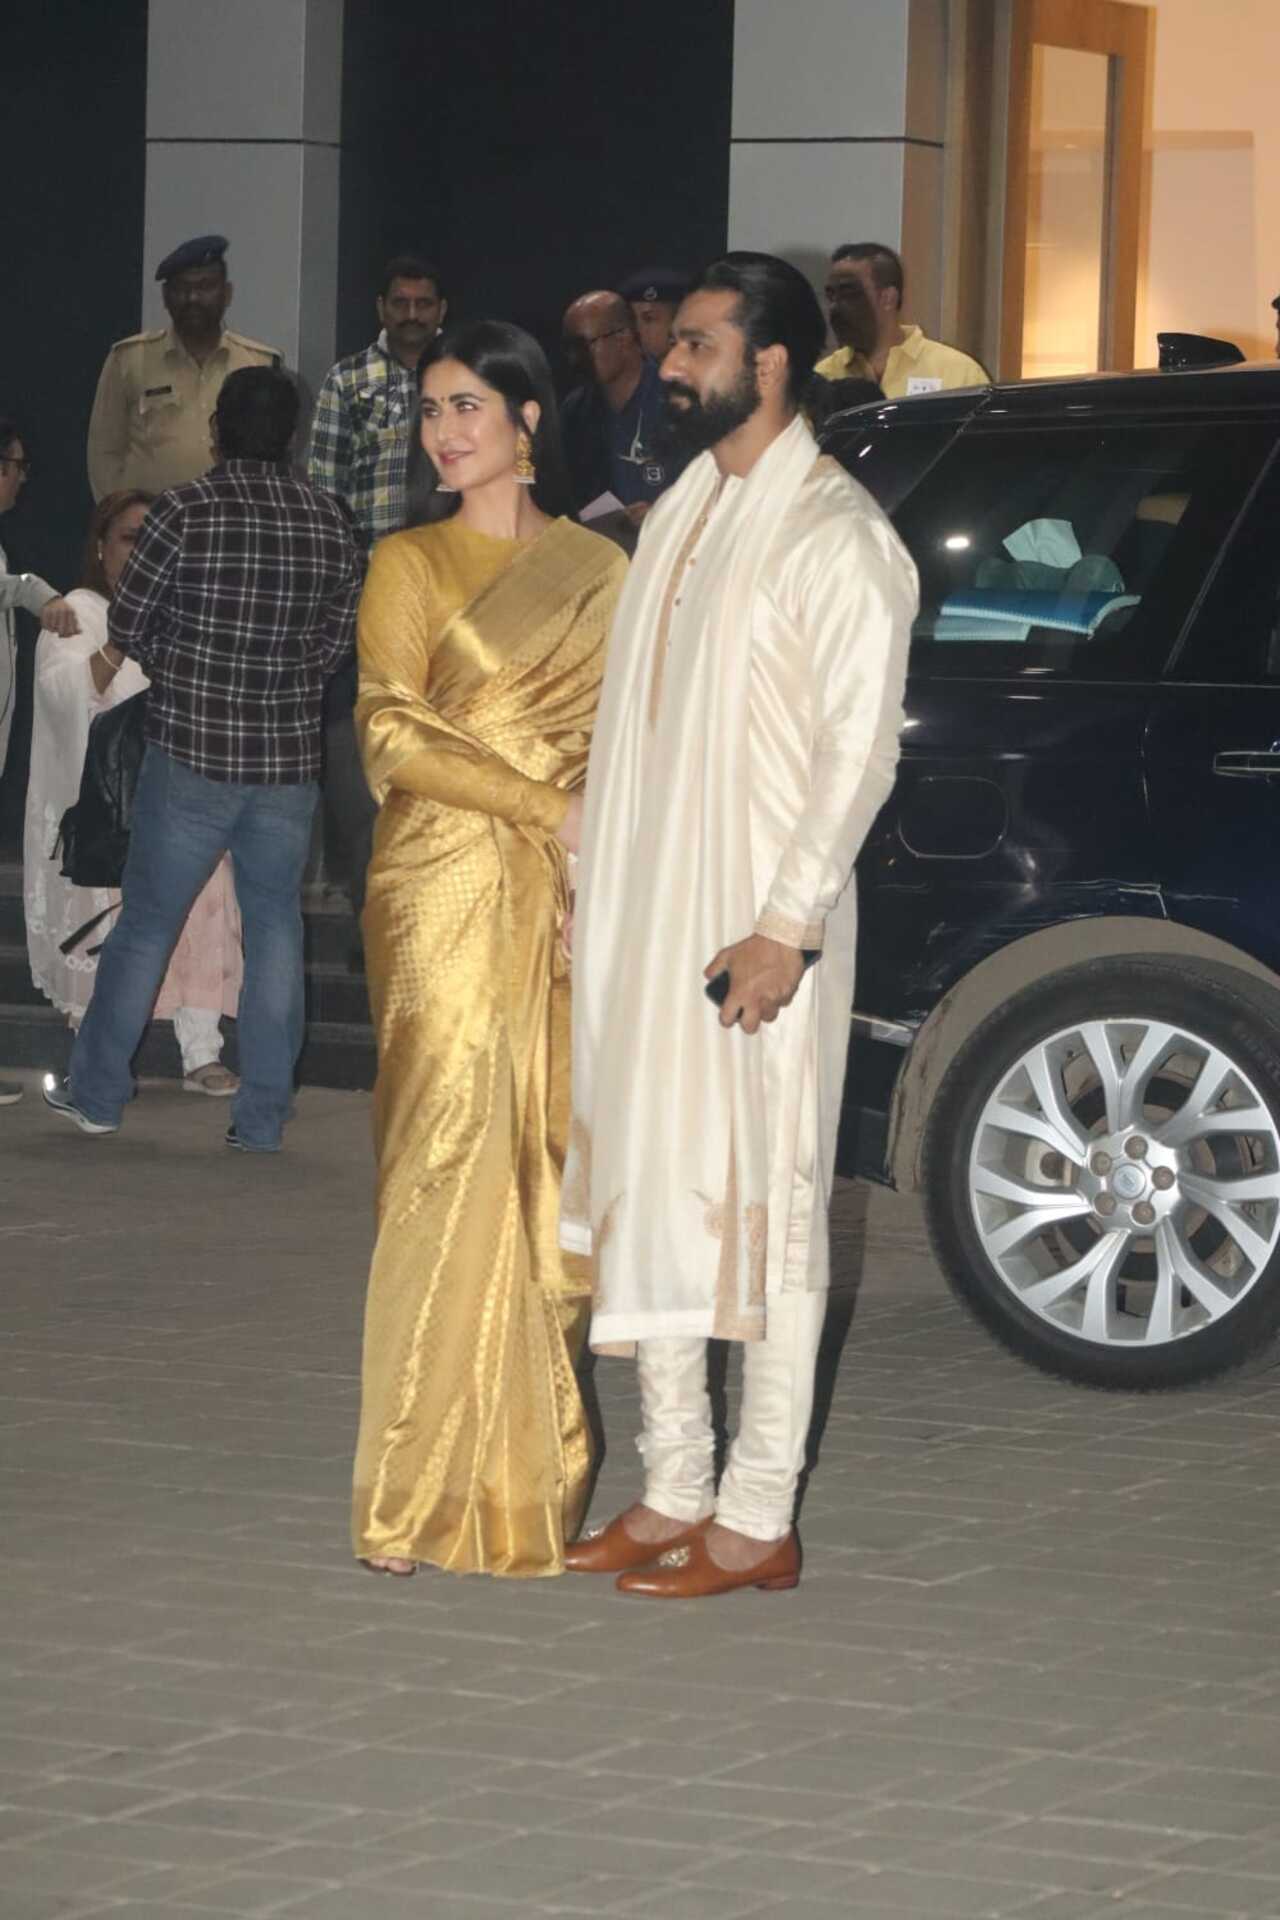 Bollywood couple Katrina Kaif and Vicky Kaushal also arrived at the airport on Monday. While Katrina Kaif looked gorgeous in a golden saree, Vicky looked smart in a shiny white kurta set. The Sam Bahadur actor also sported a long, thick beard which is his look for an upcoming film